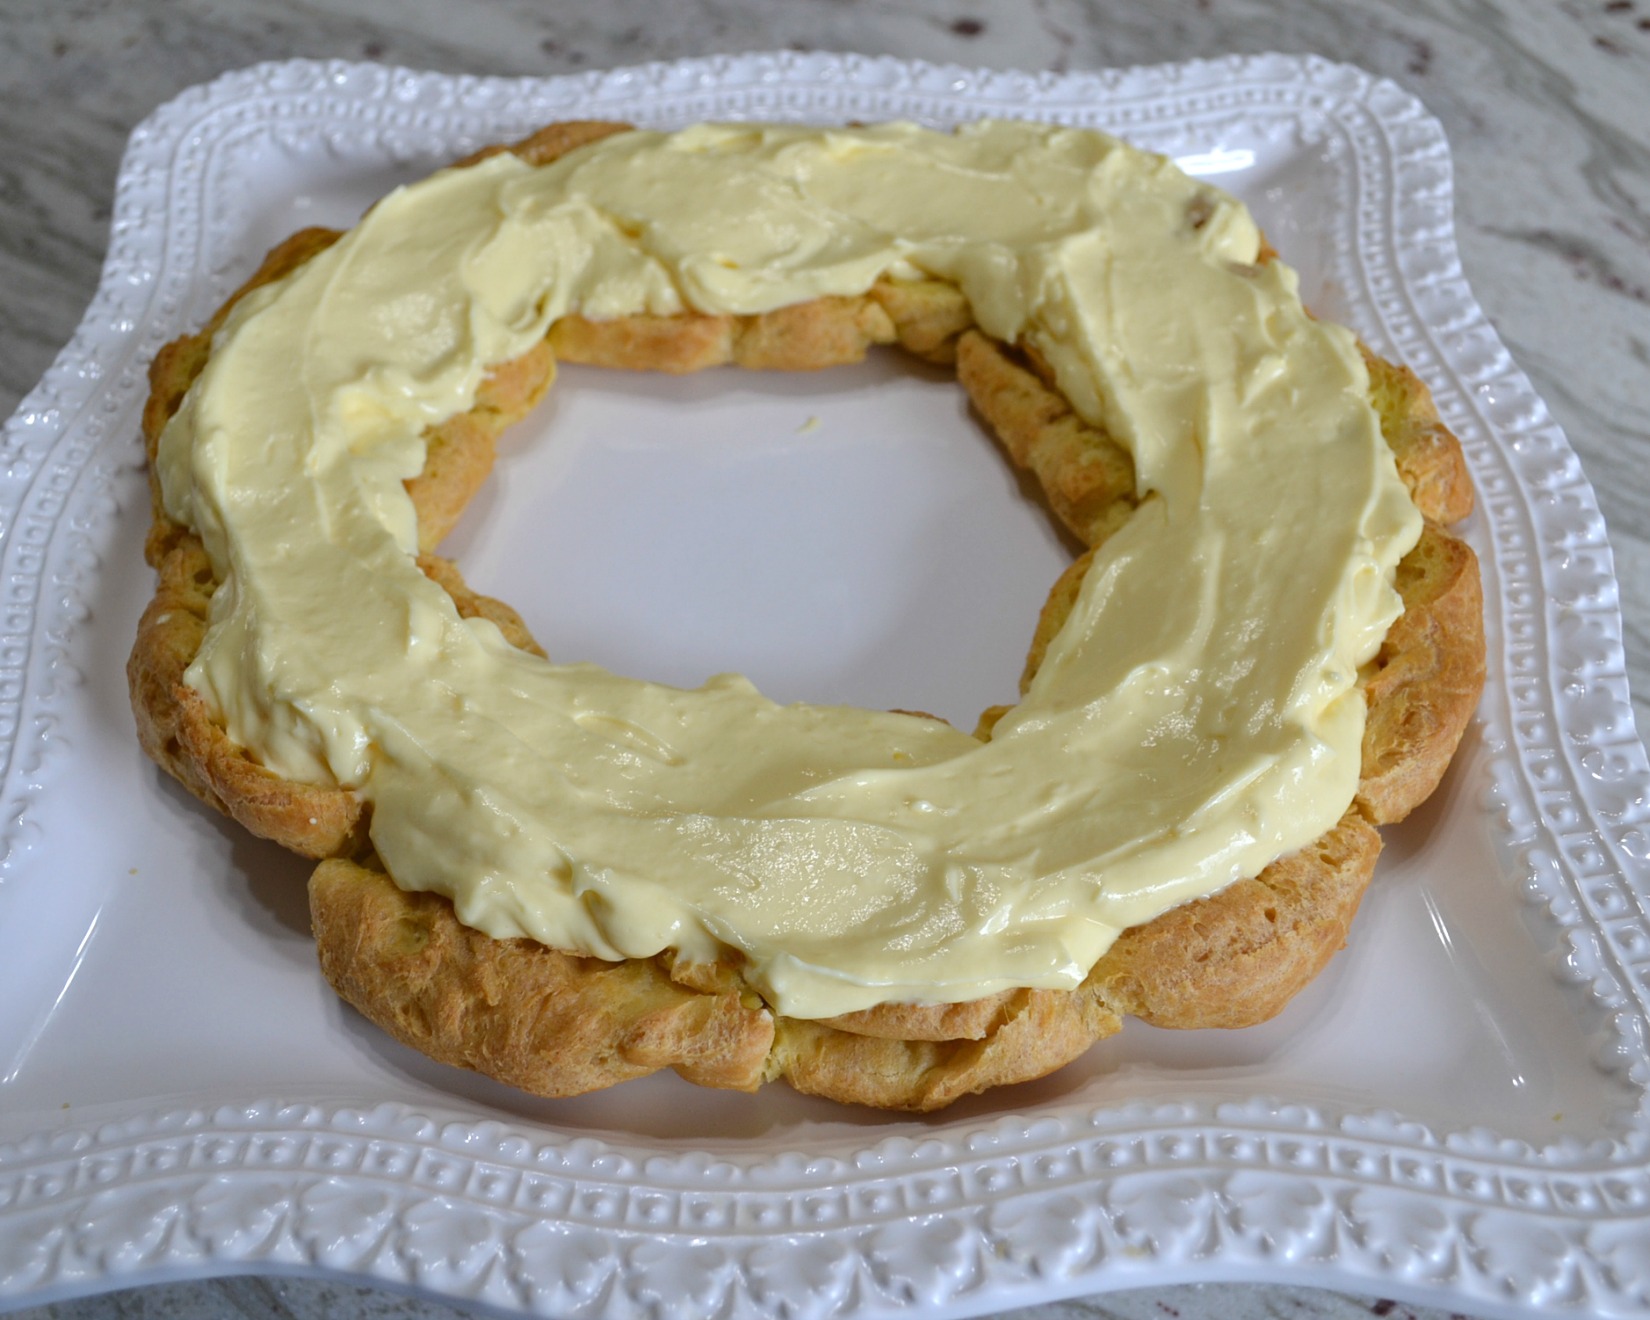 This elegant dessert is a cream puff ring filled with pudding and cherry pie filling. 